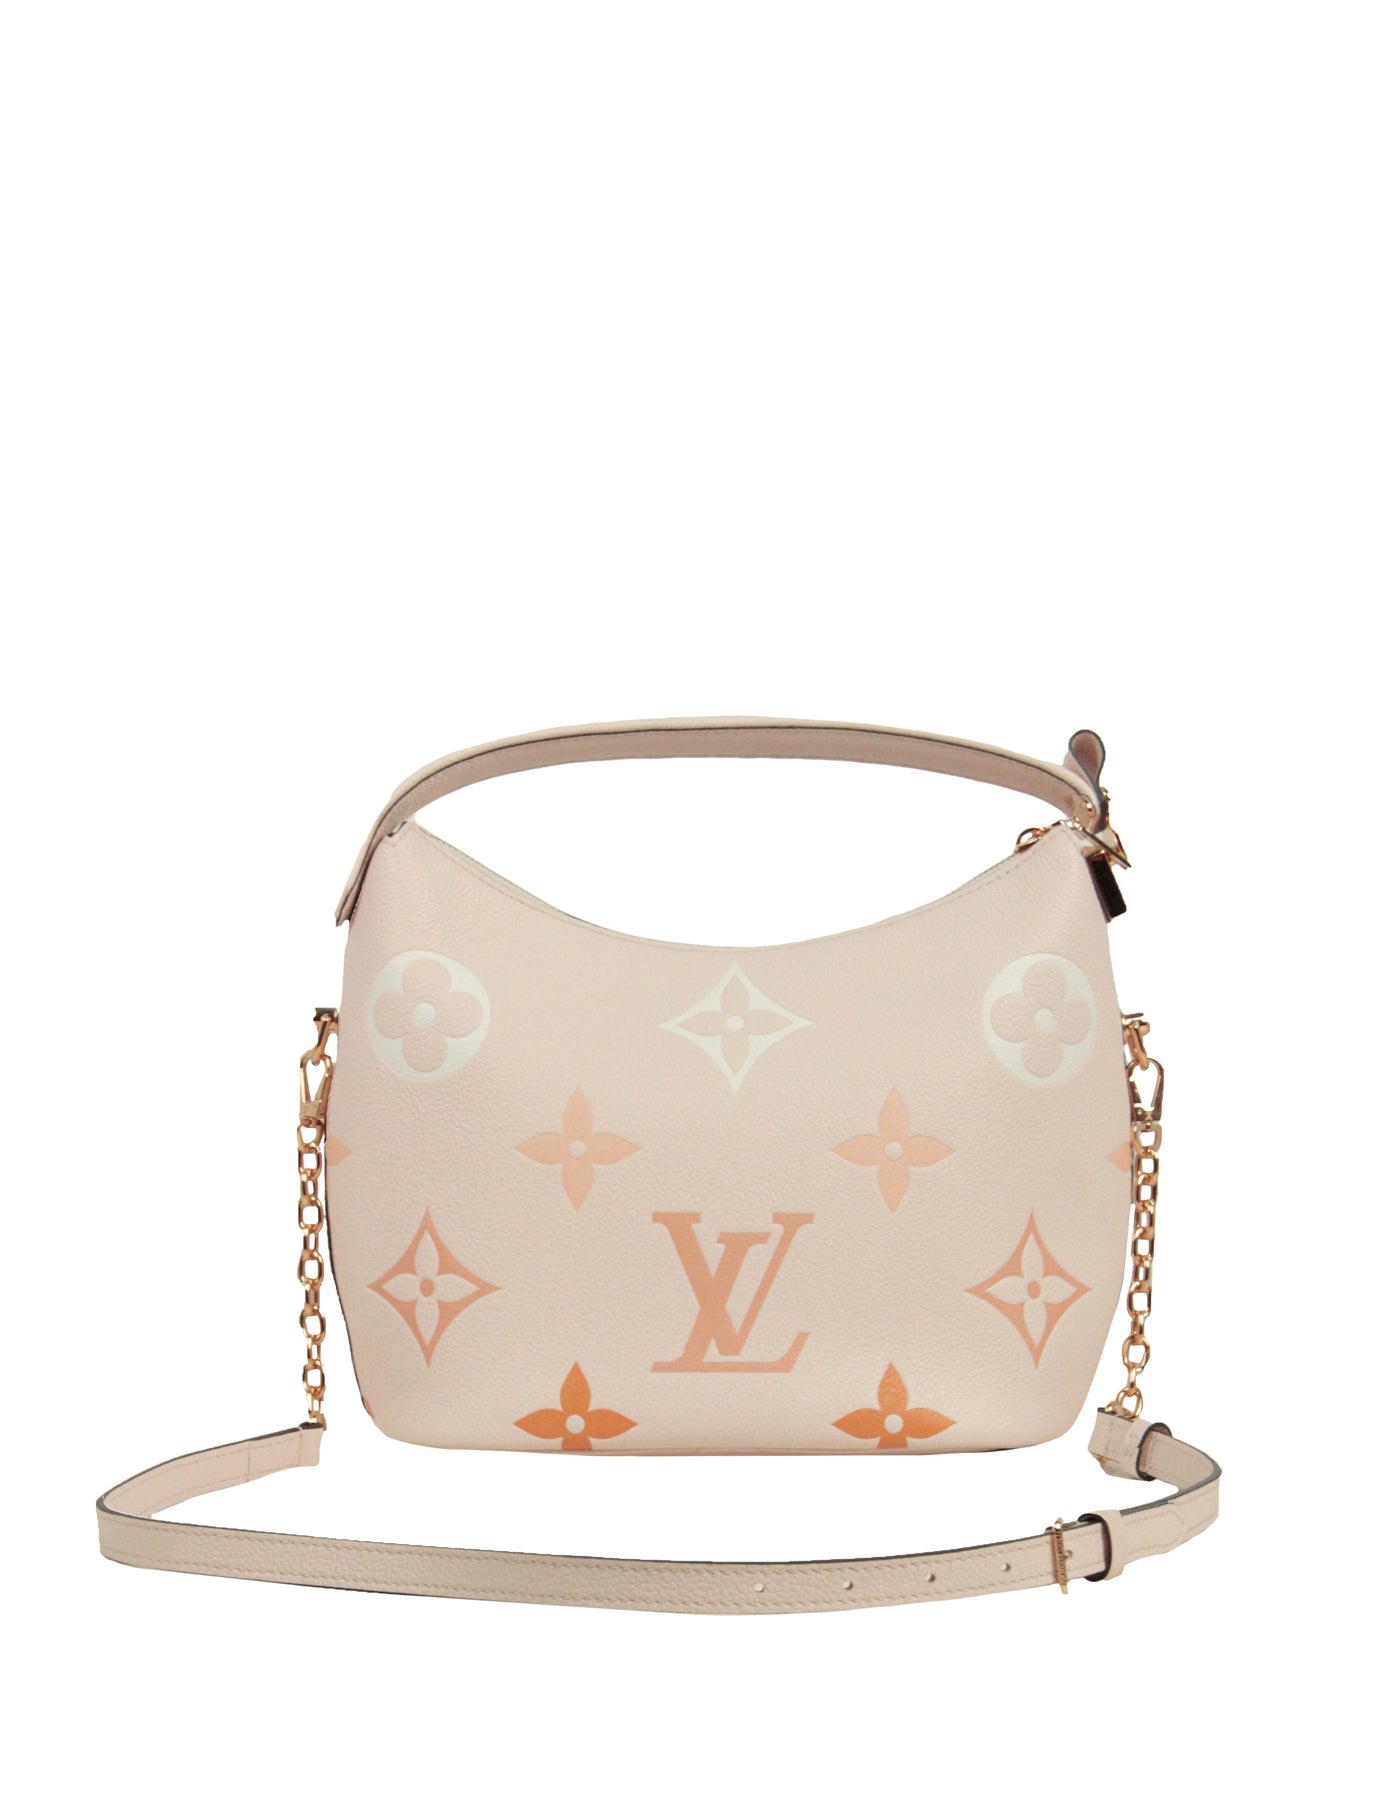 Luv Luxe - Louis Vuitton Marshmallow Bag by the Pool. With a name